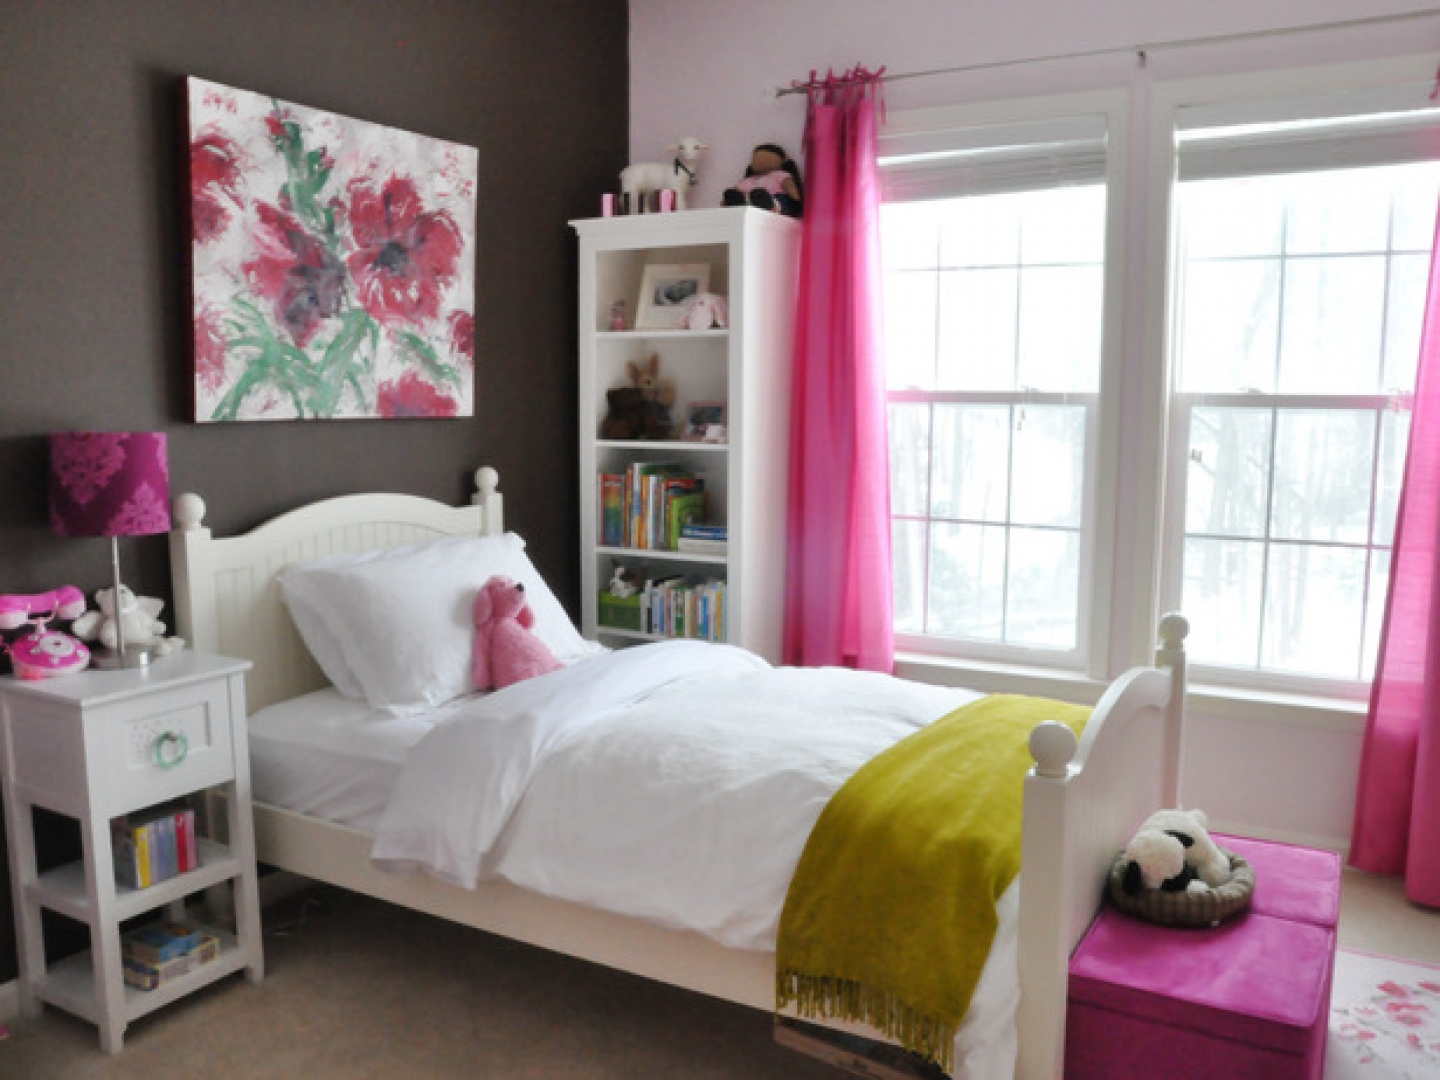 Girls bedroom decorating ideas decorating ideas for teen girls rooms